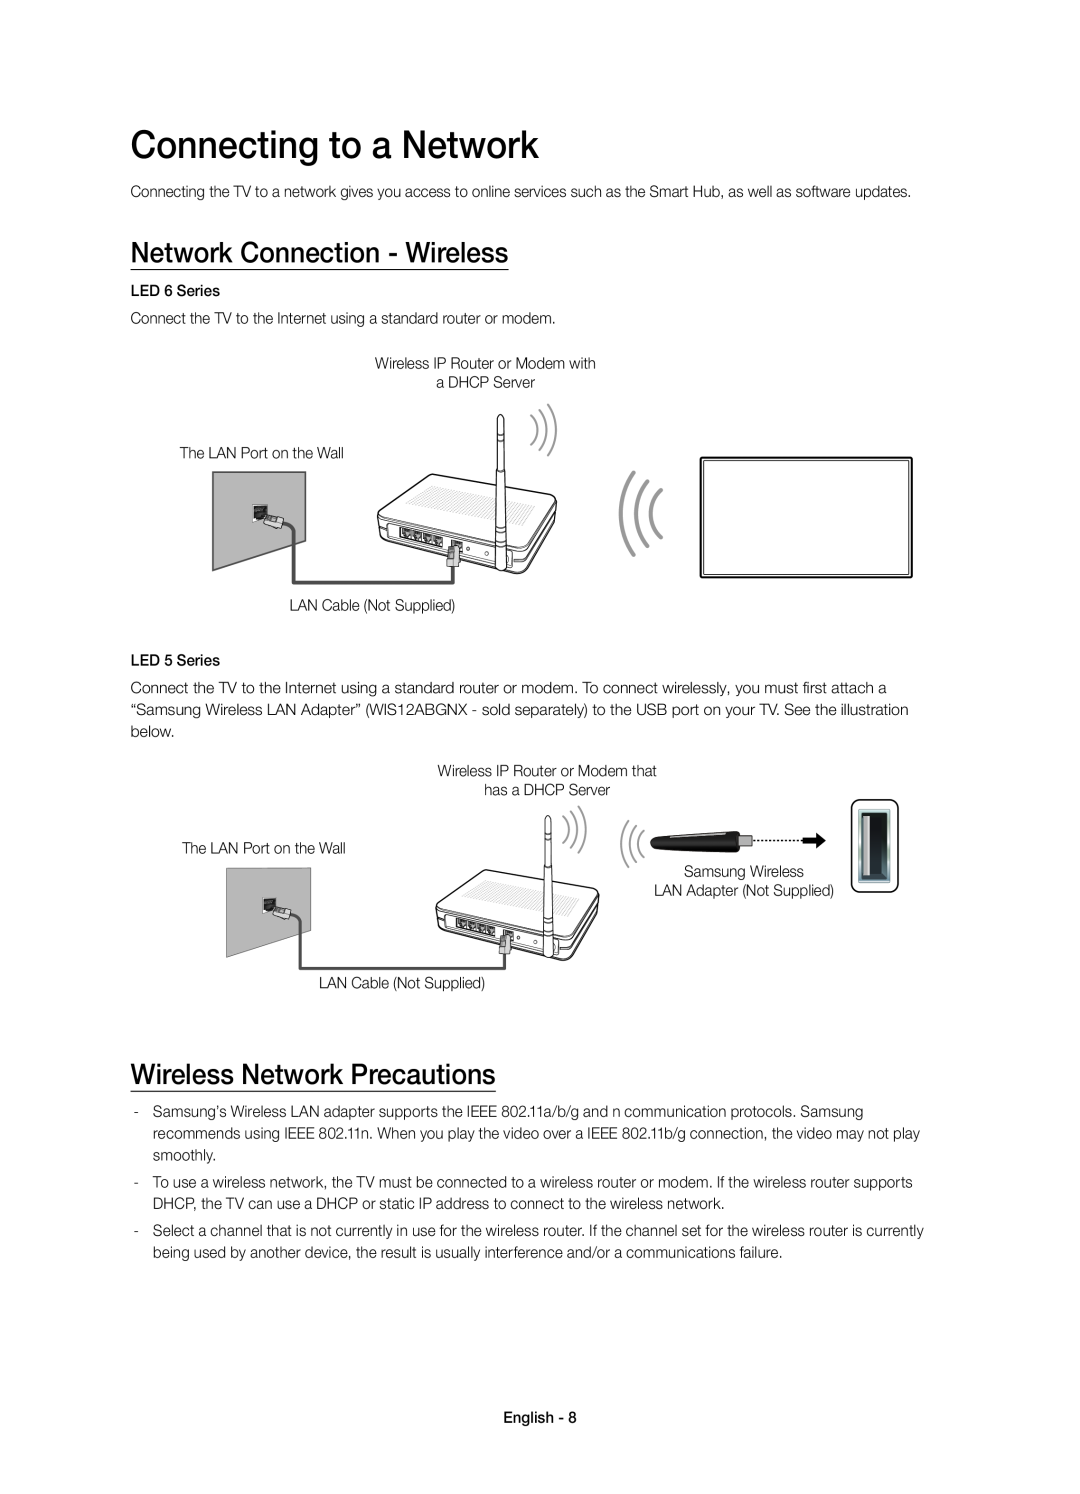 Samsung UE40H5303AWXXH manual Connecting to a Network, Network Connection - Wireless, Wireless Network Precautions 